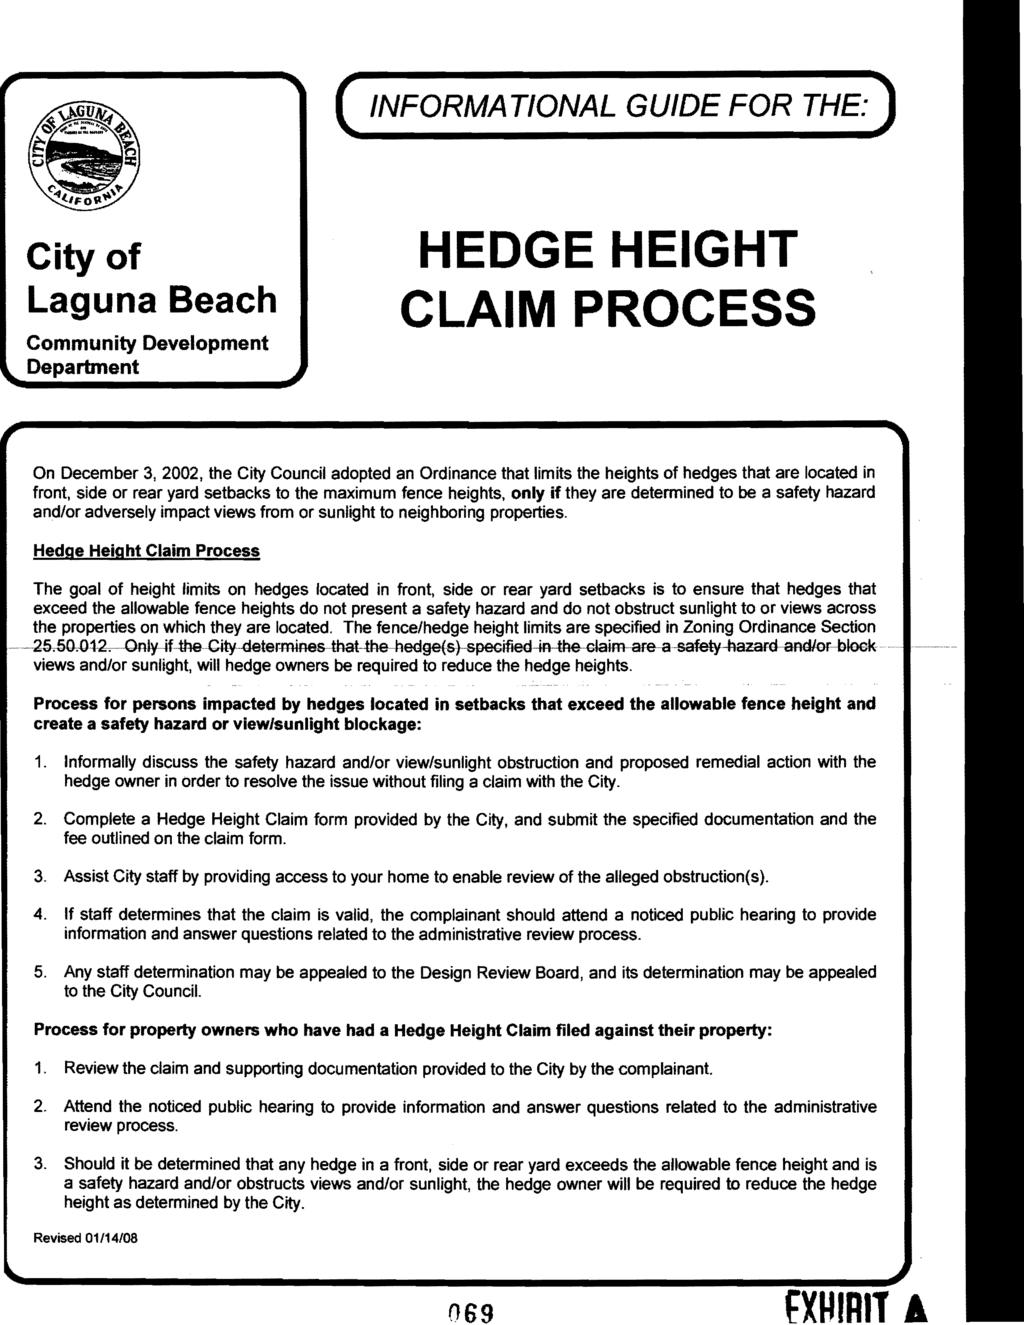 069 ( INFORMA T10NAL GUIDE FOR THE: ) City of Laguna Beach Community Development Deparbnent HEDGE HEIGHT CLAIM PROCESS On December 3, 2002, the City Council adopted an Ordinance that limits the